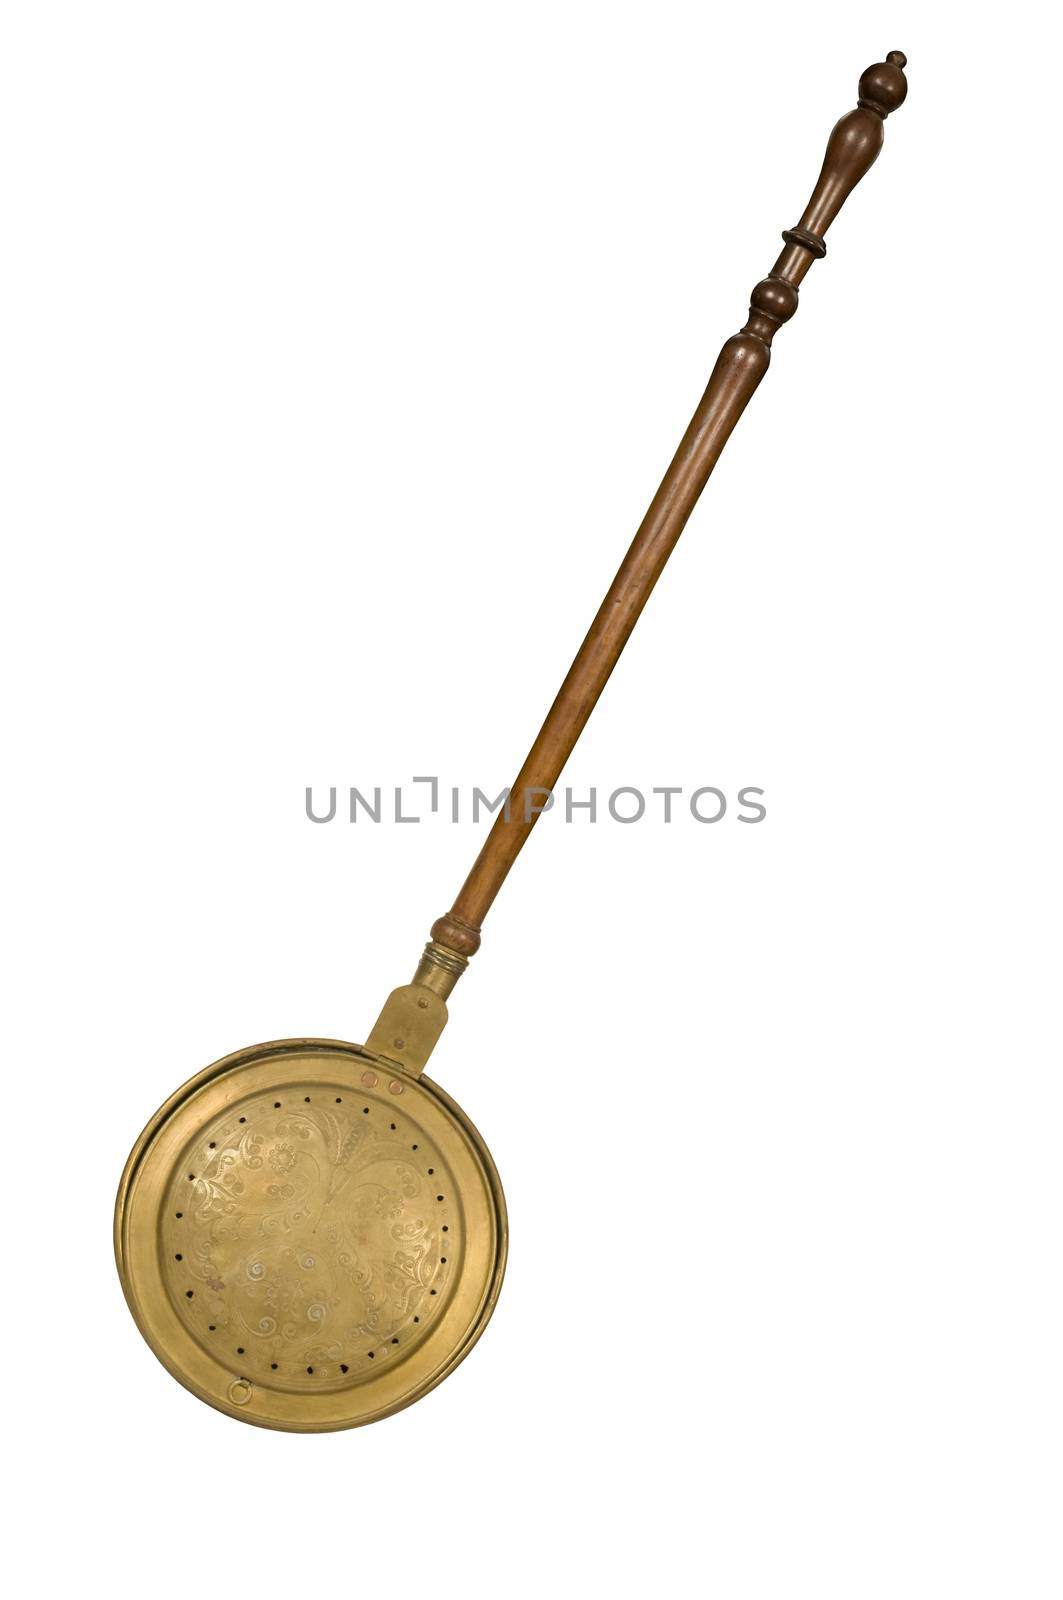 Long-handled antique bed warmer isolated against white background